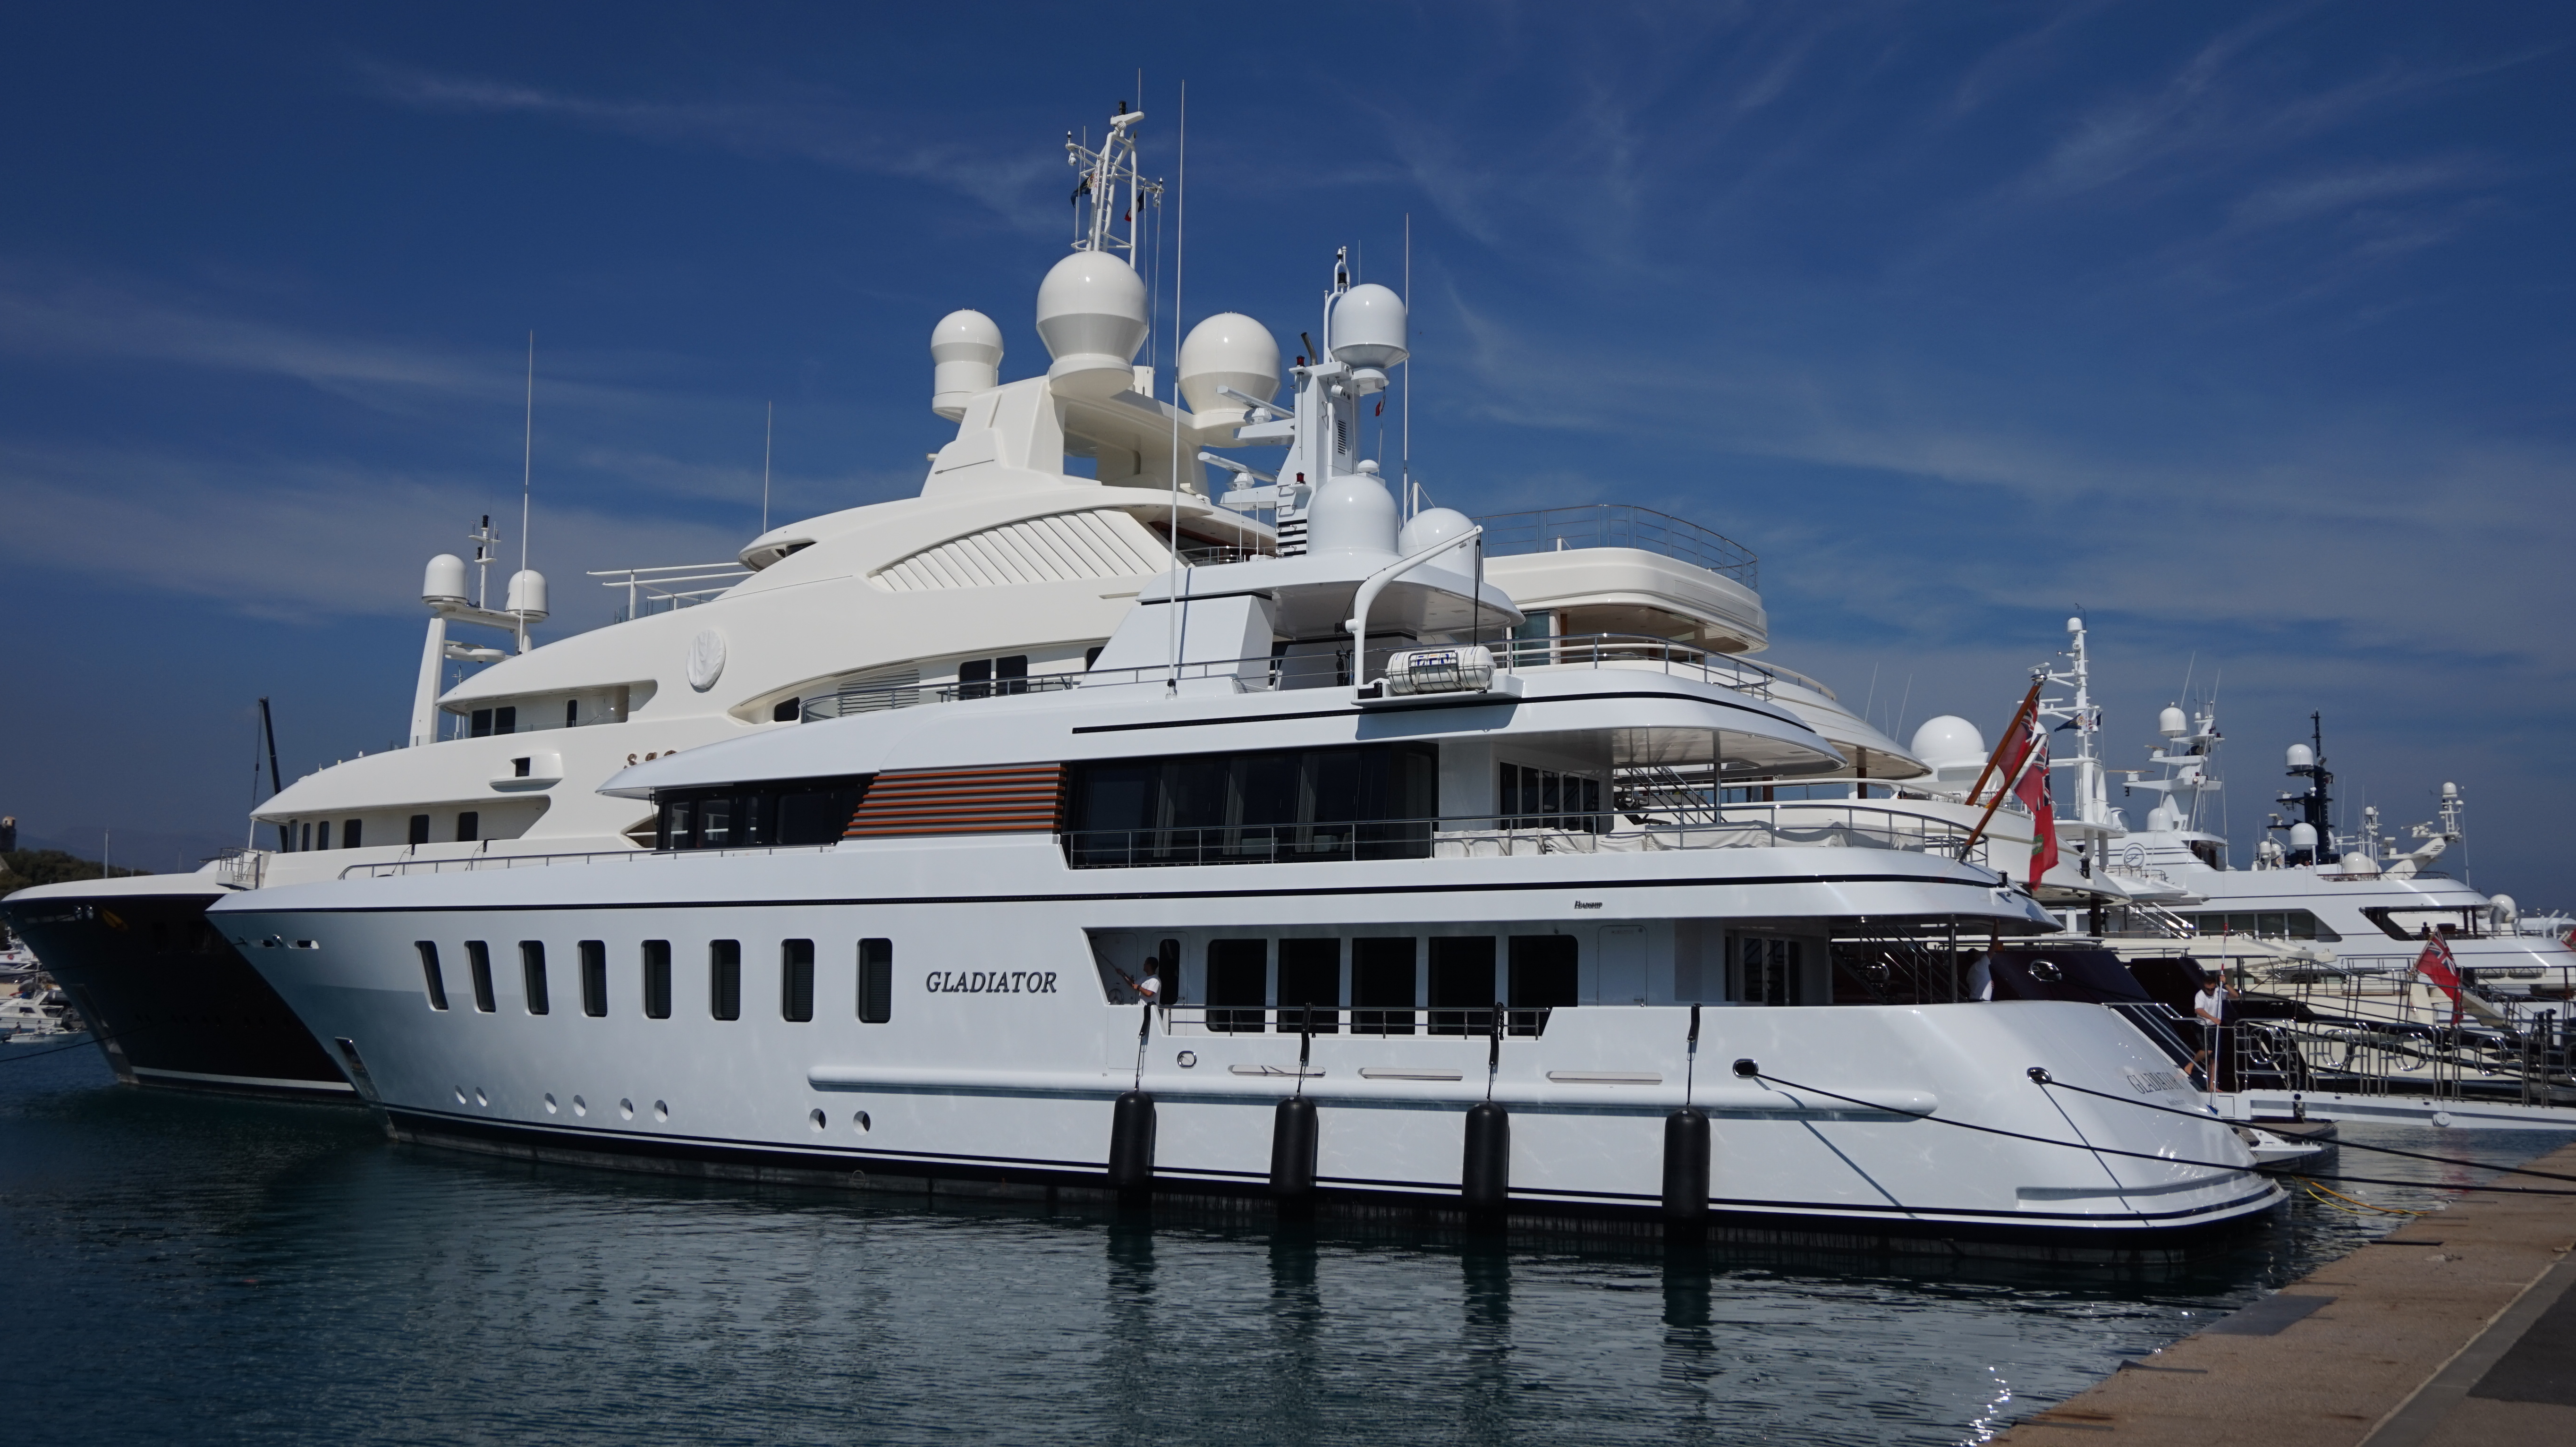 The Netherlands: Feadship Royal Van Lent Shipyard Launches F45